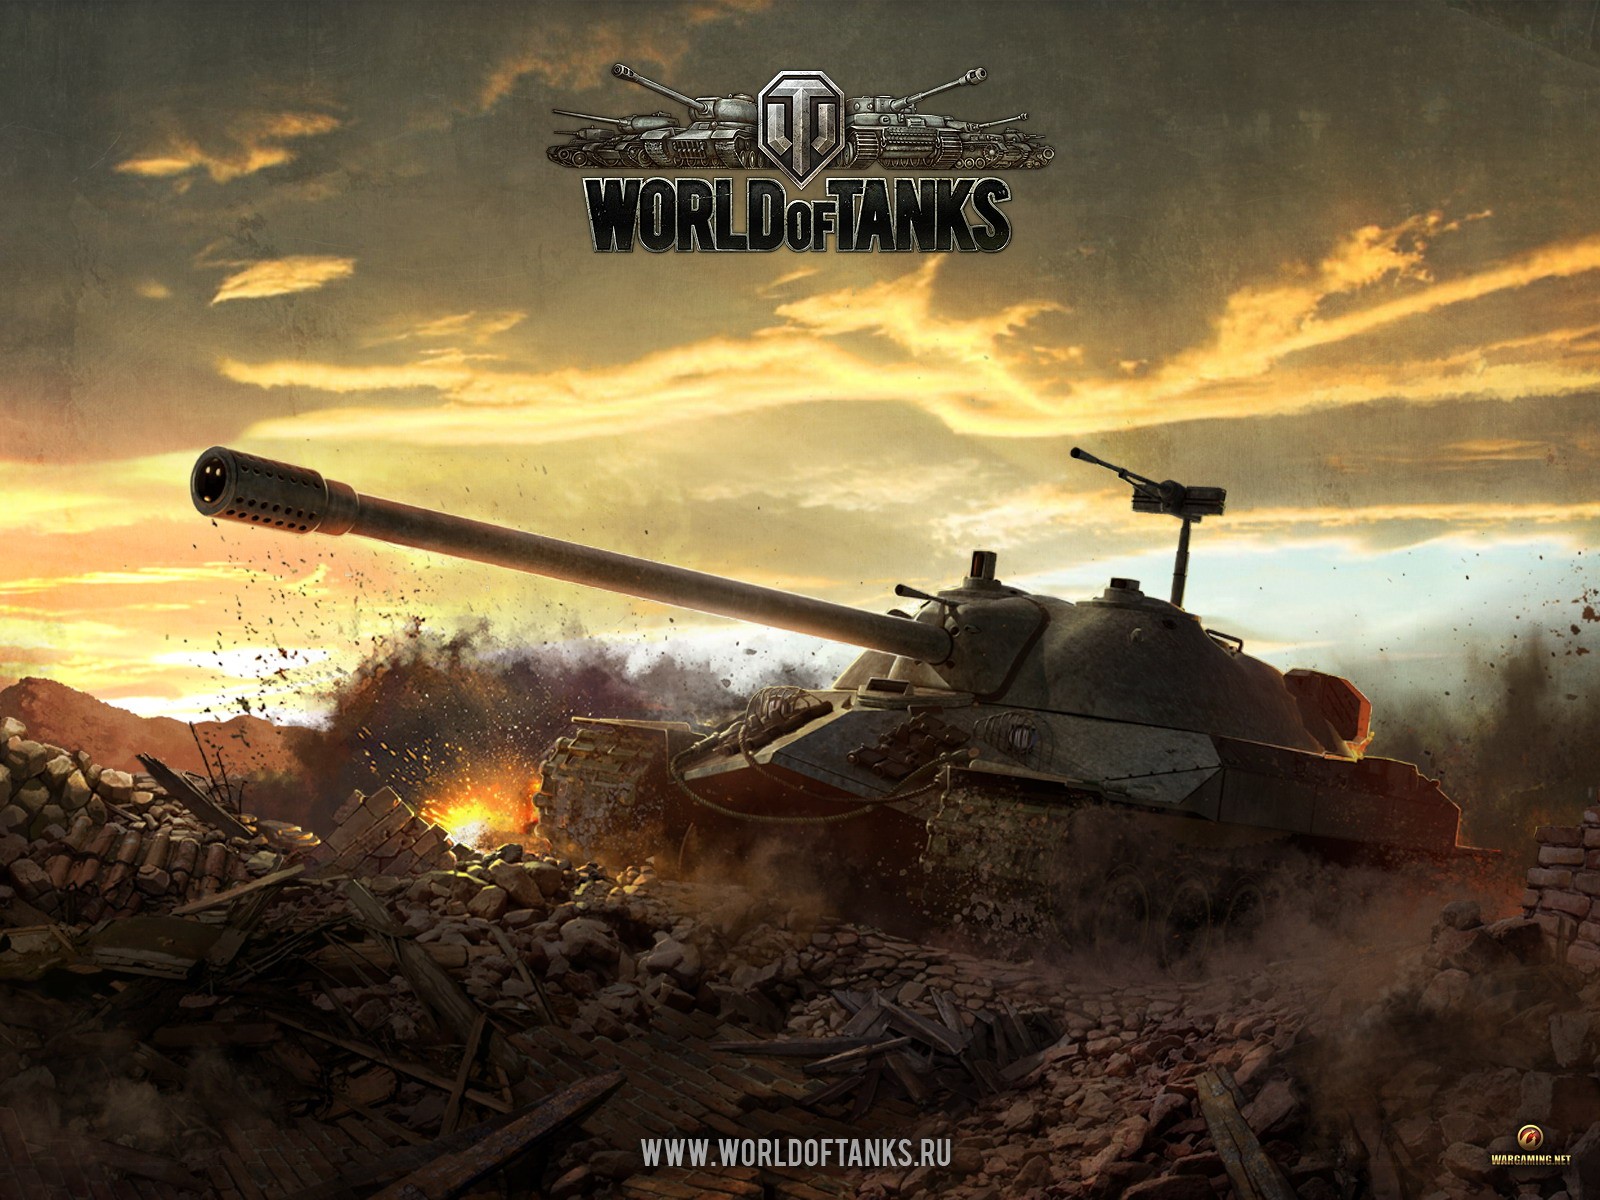 General 1600x1200 World of Tanks tank IS-7 wargaming video games PC gaming vehicle military video game art military vehicle